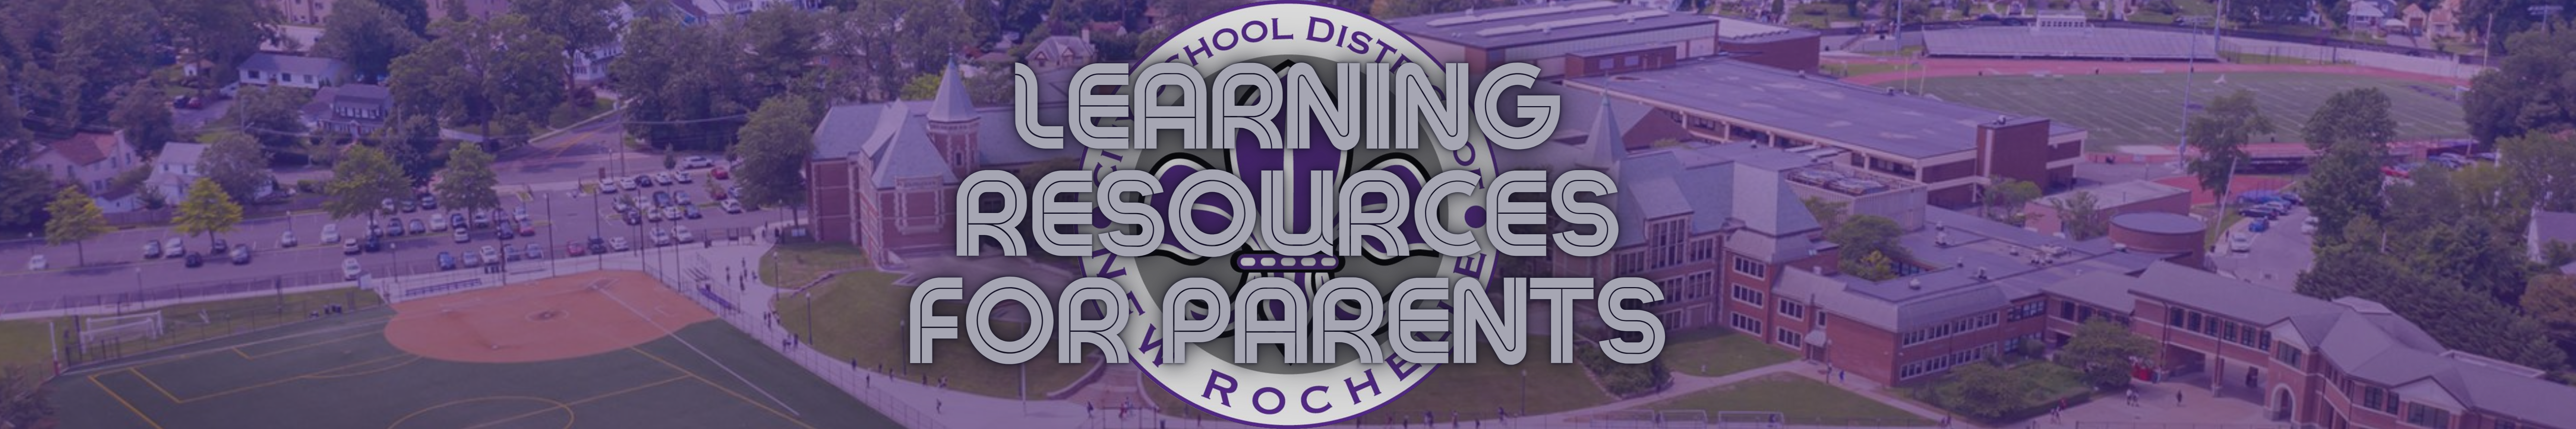 resources for parents banner